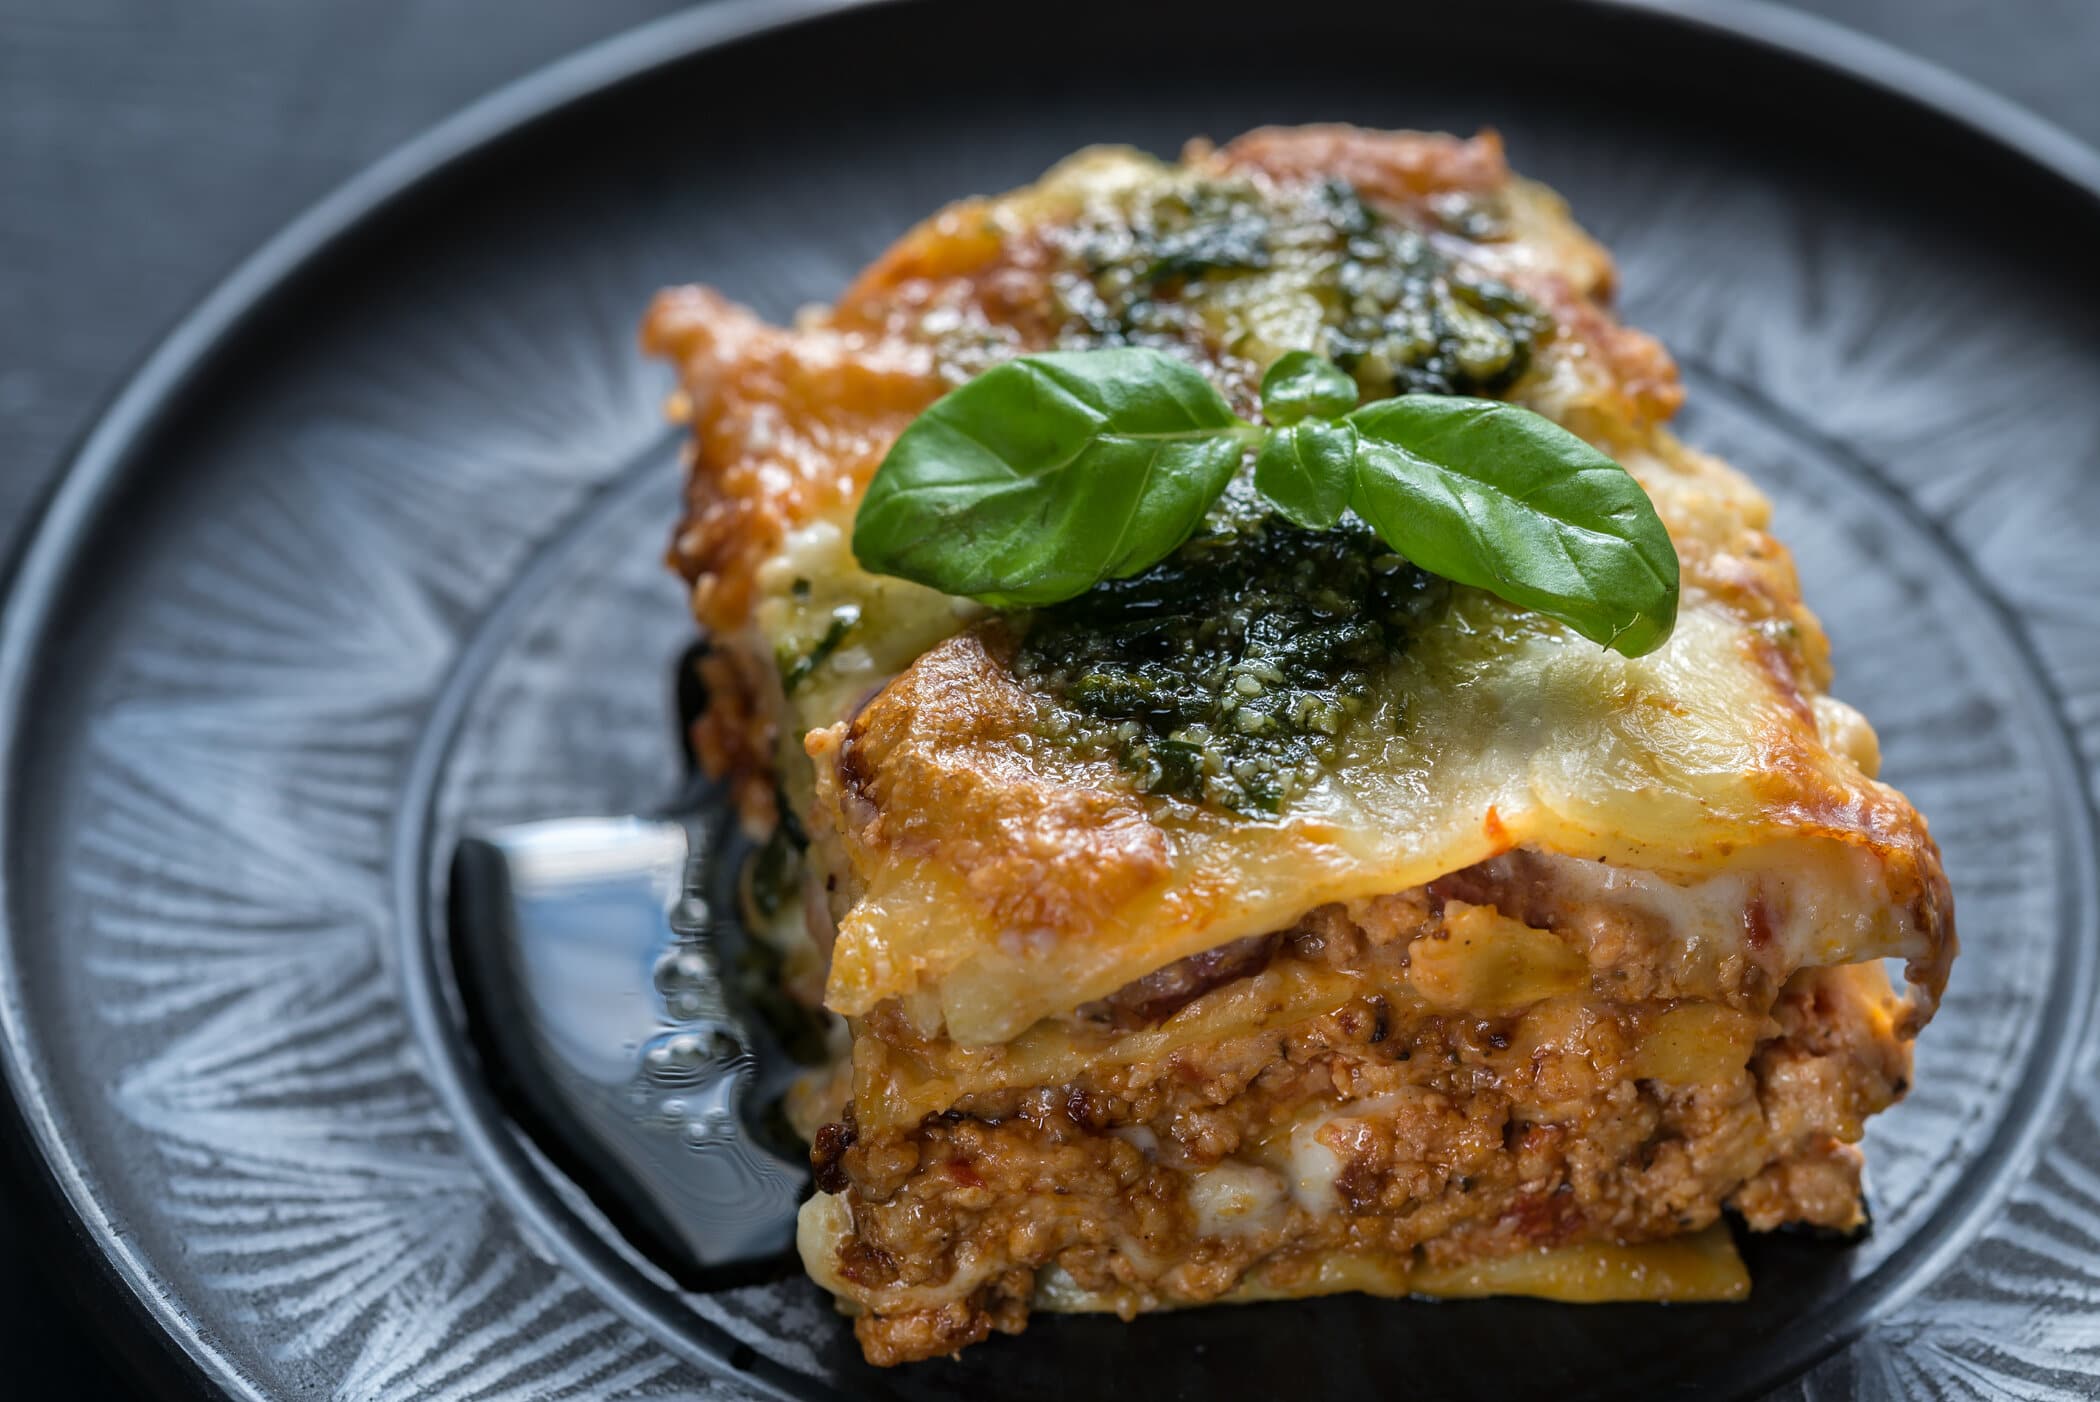 How To Speed Up Frozen Lasagna Cook Time?